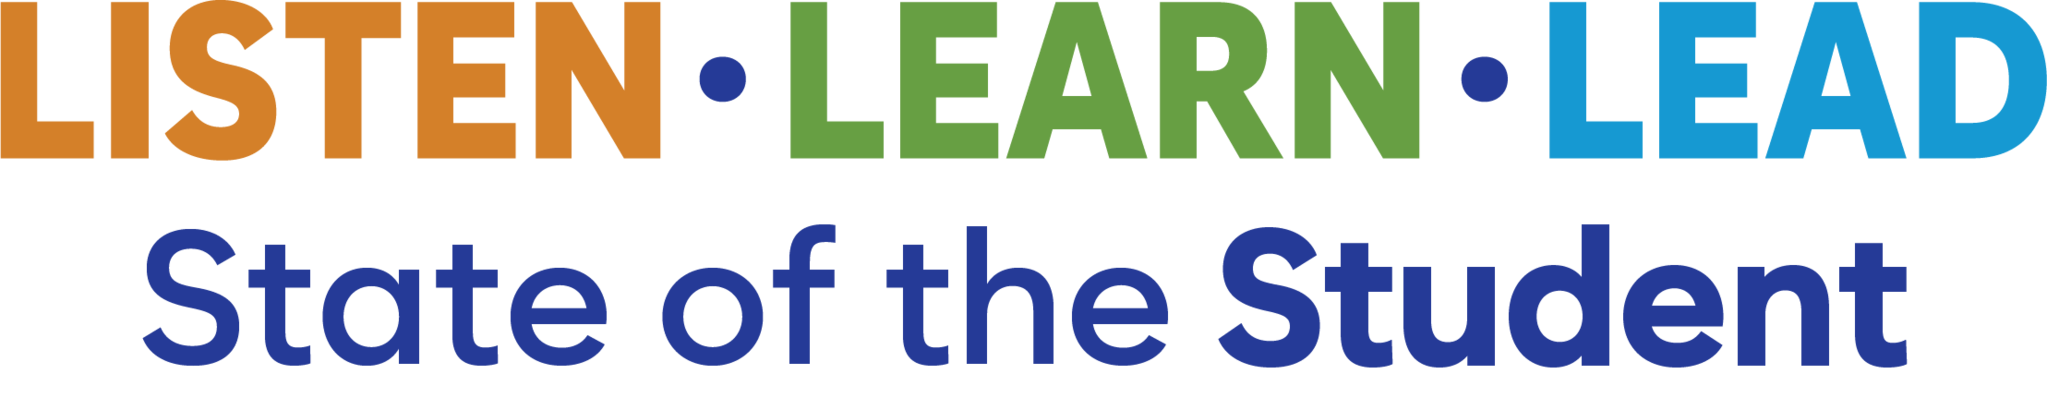 Listen Learn Lead State of the student